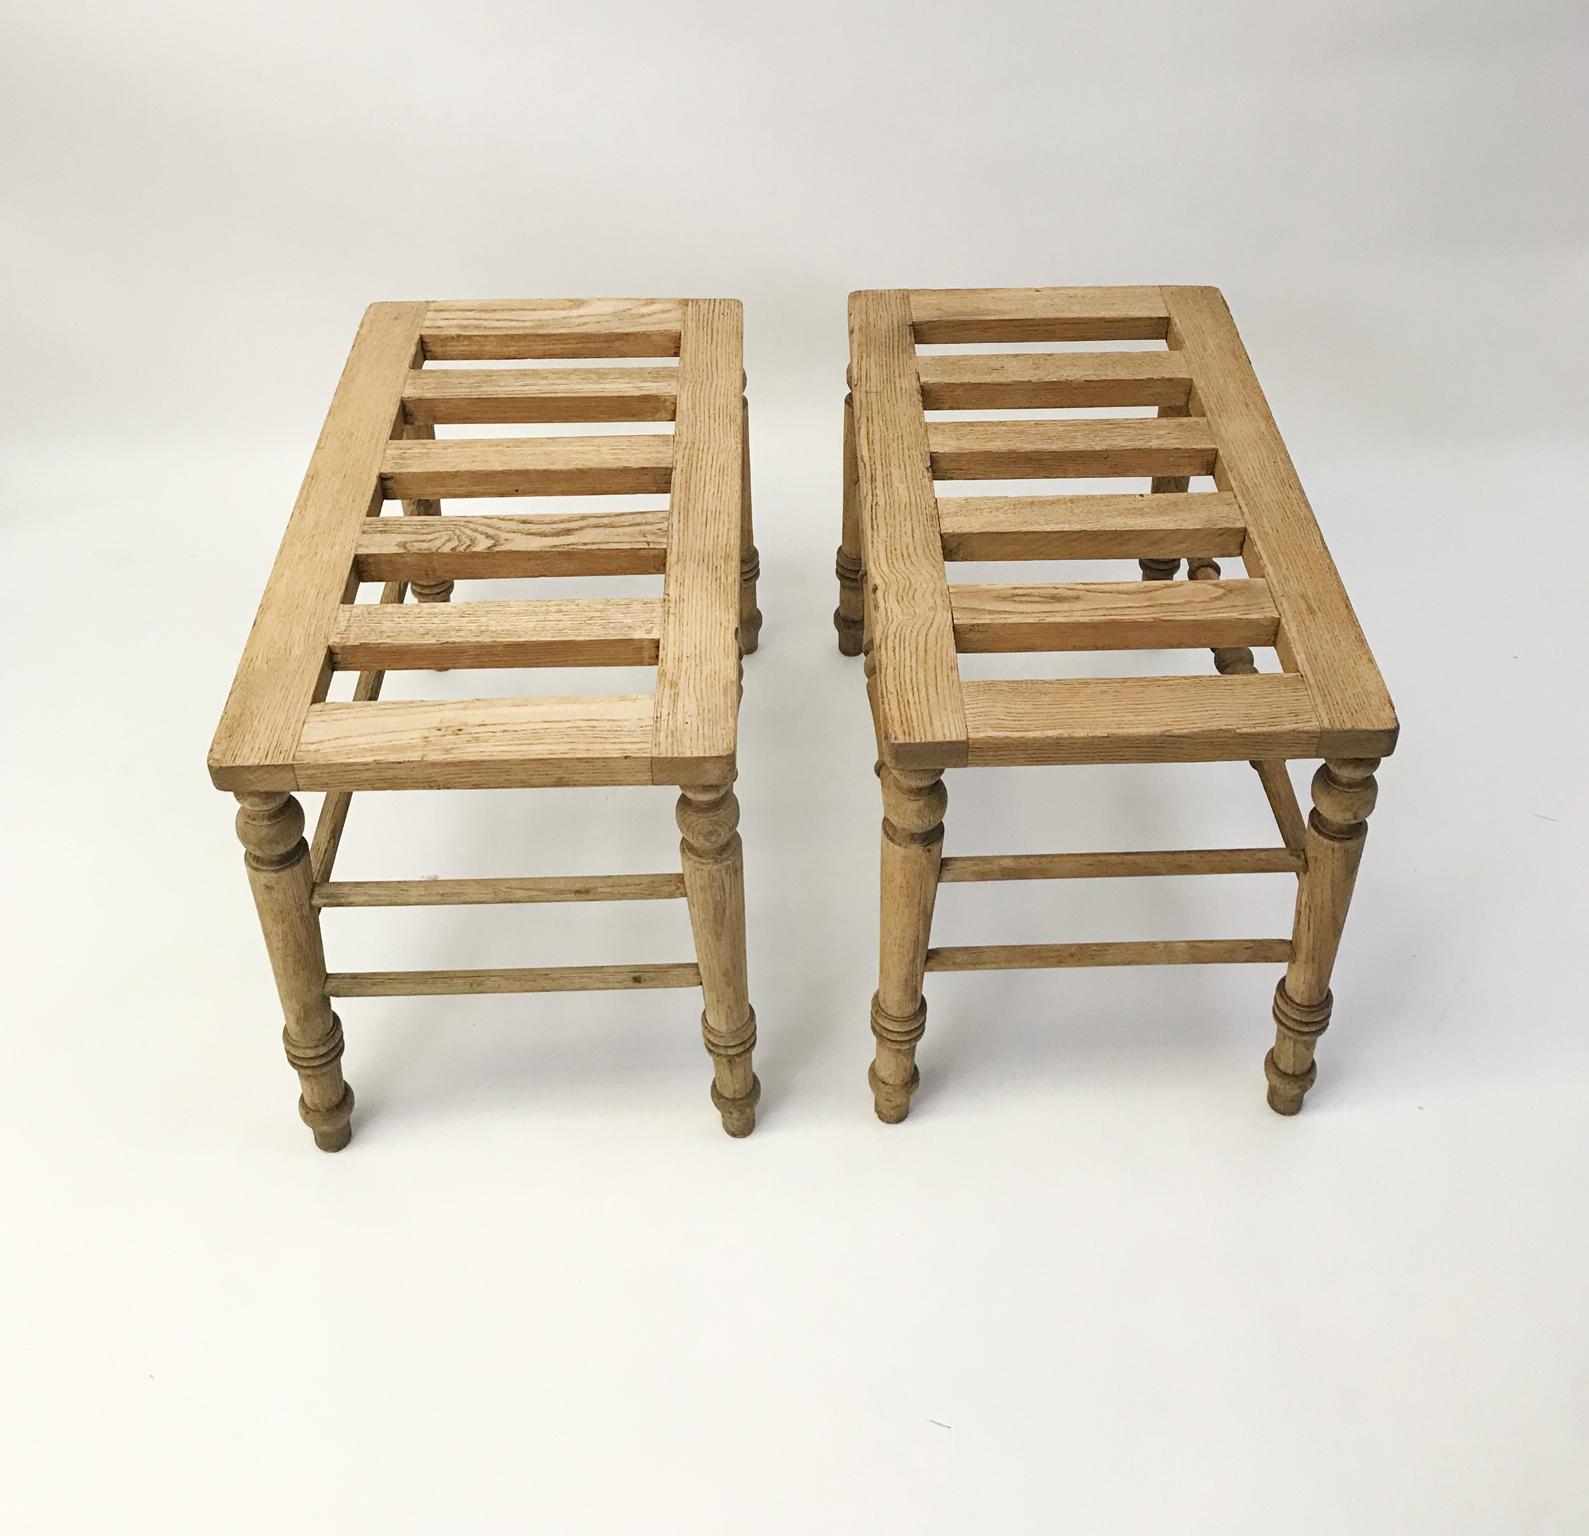 Bleached ENGLISH BLEACHED OAK Pair of Luggage Racks, Late 19th Century